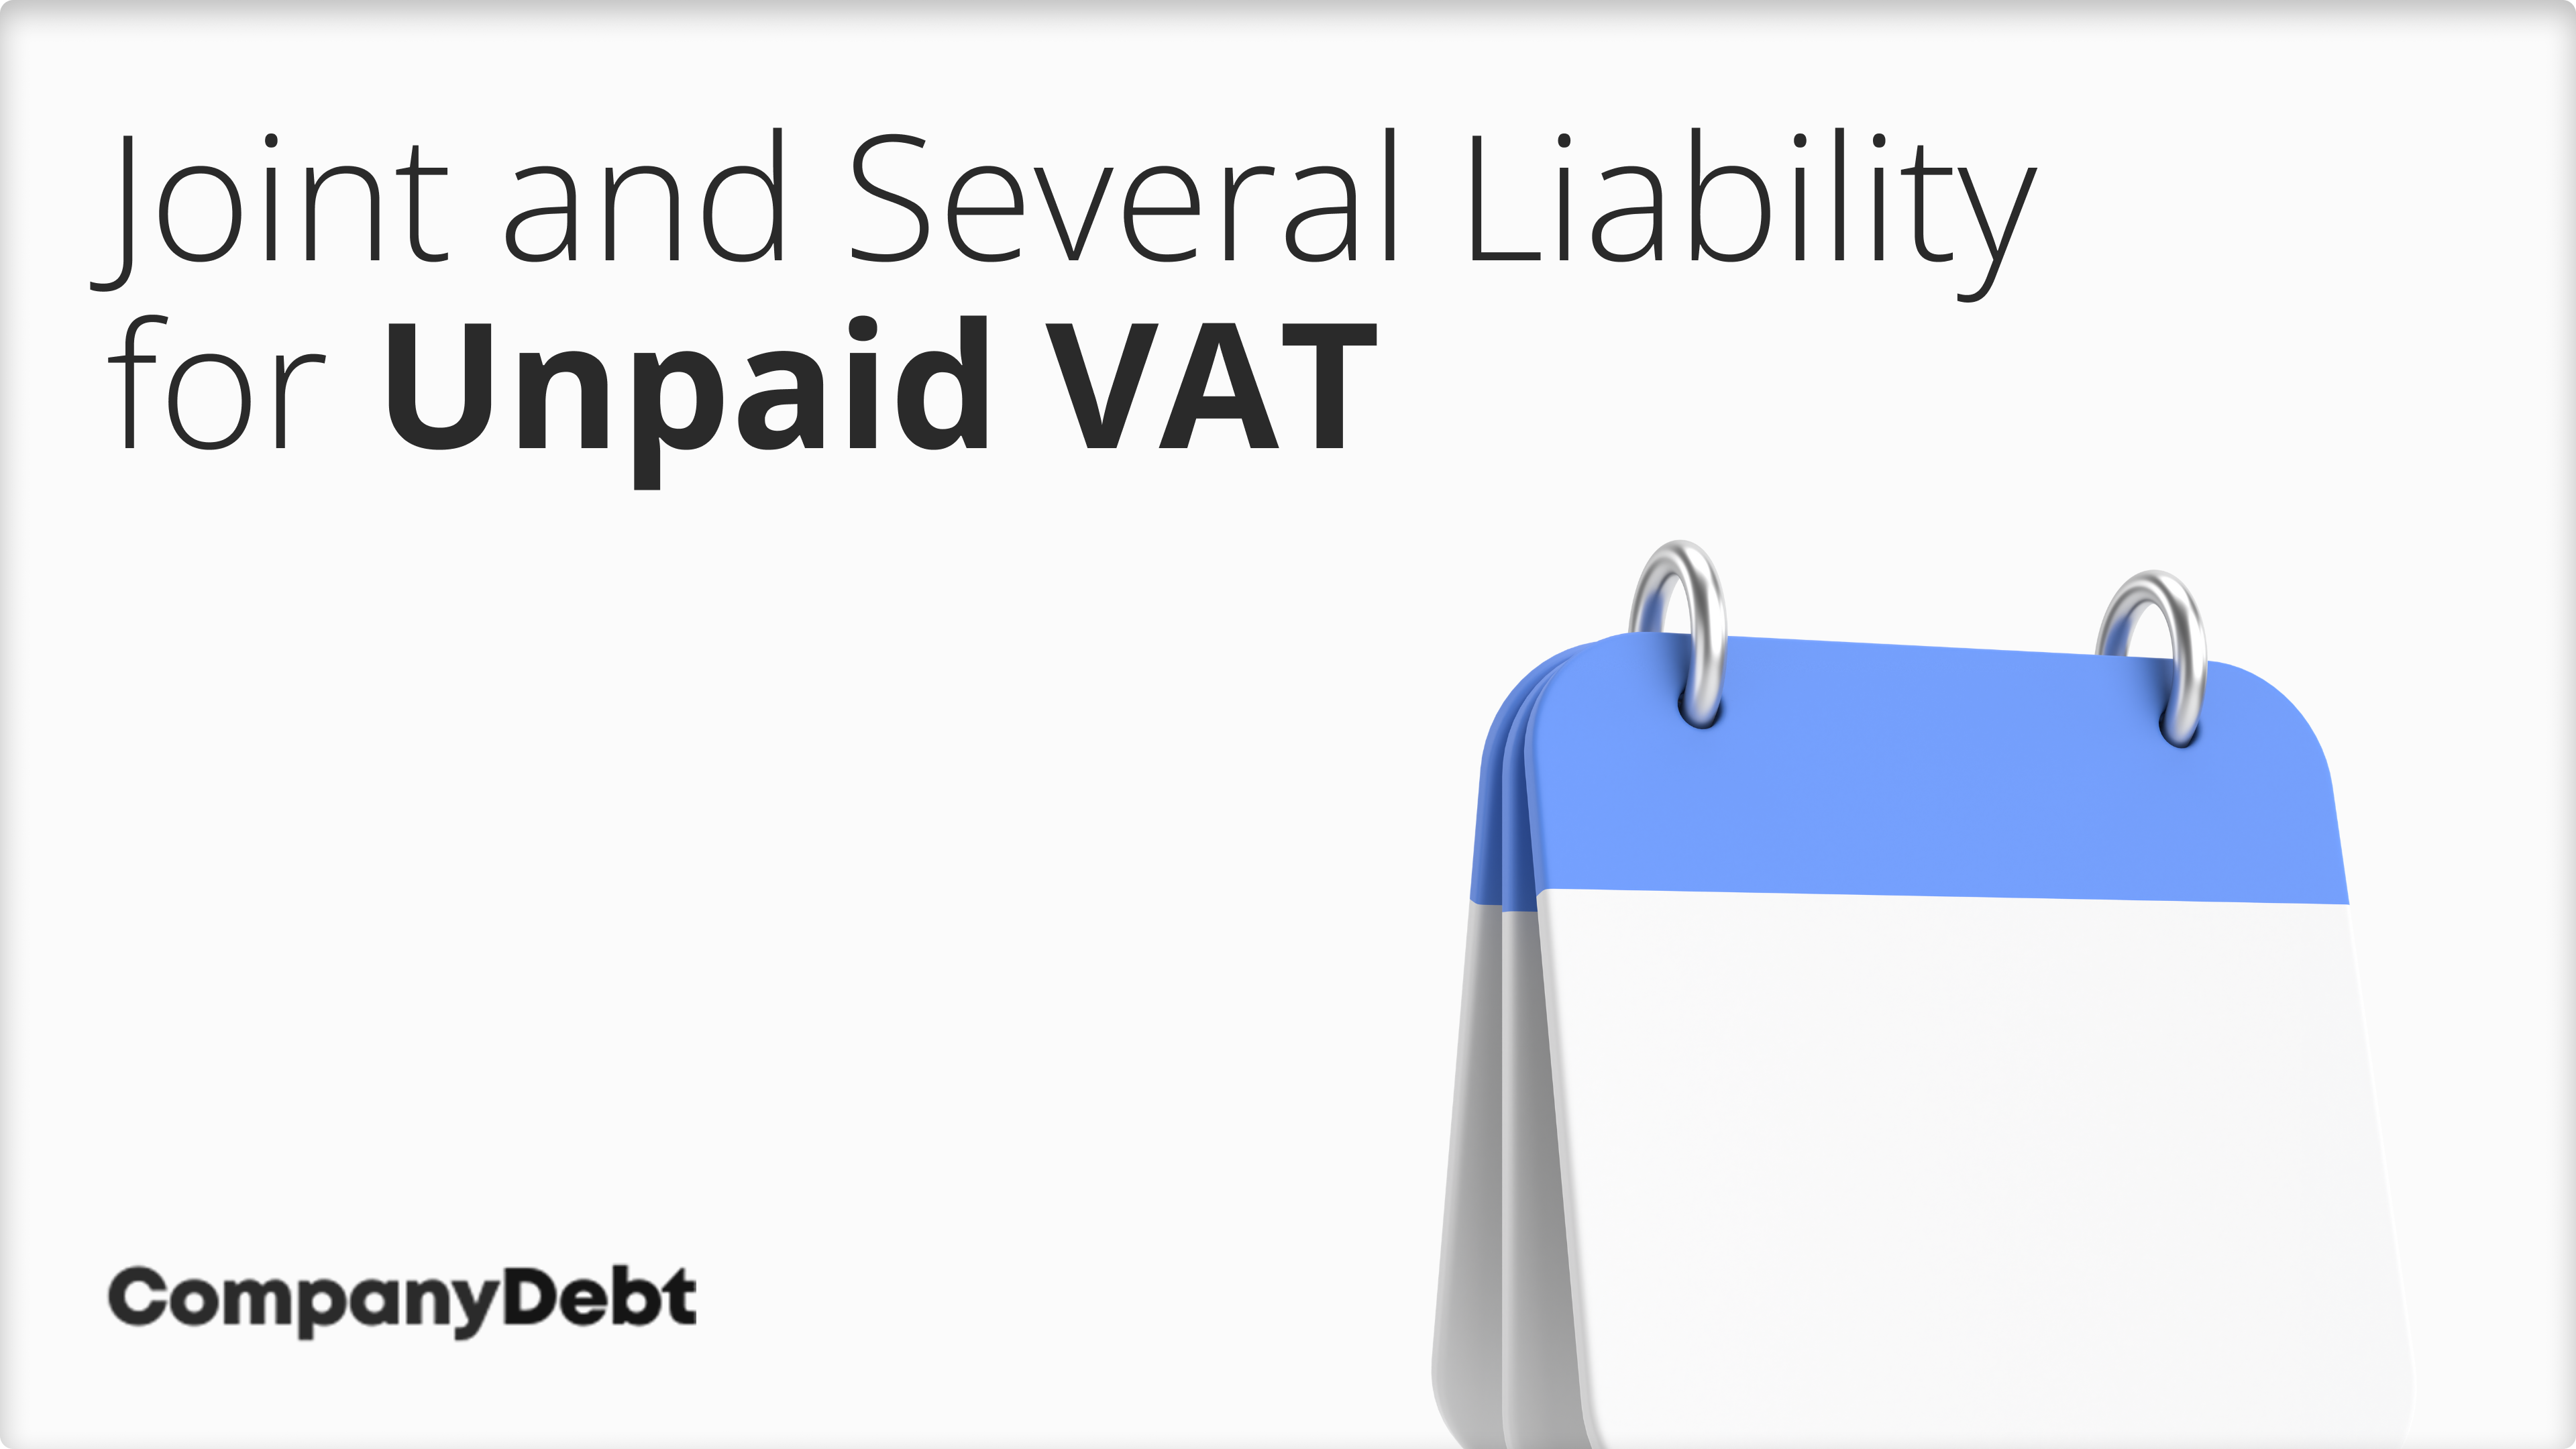 Joint and Several Liability for Unpaid VAT